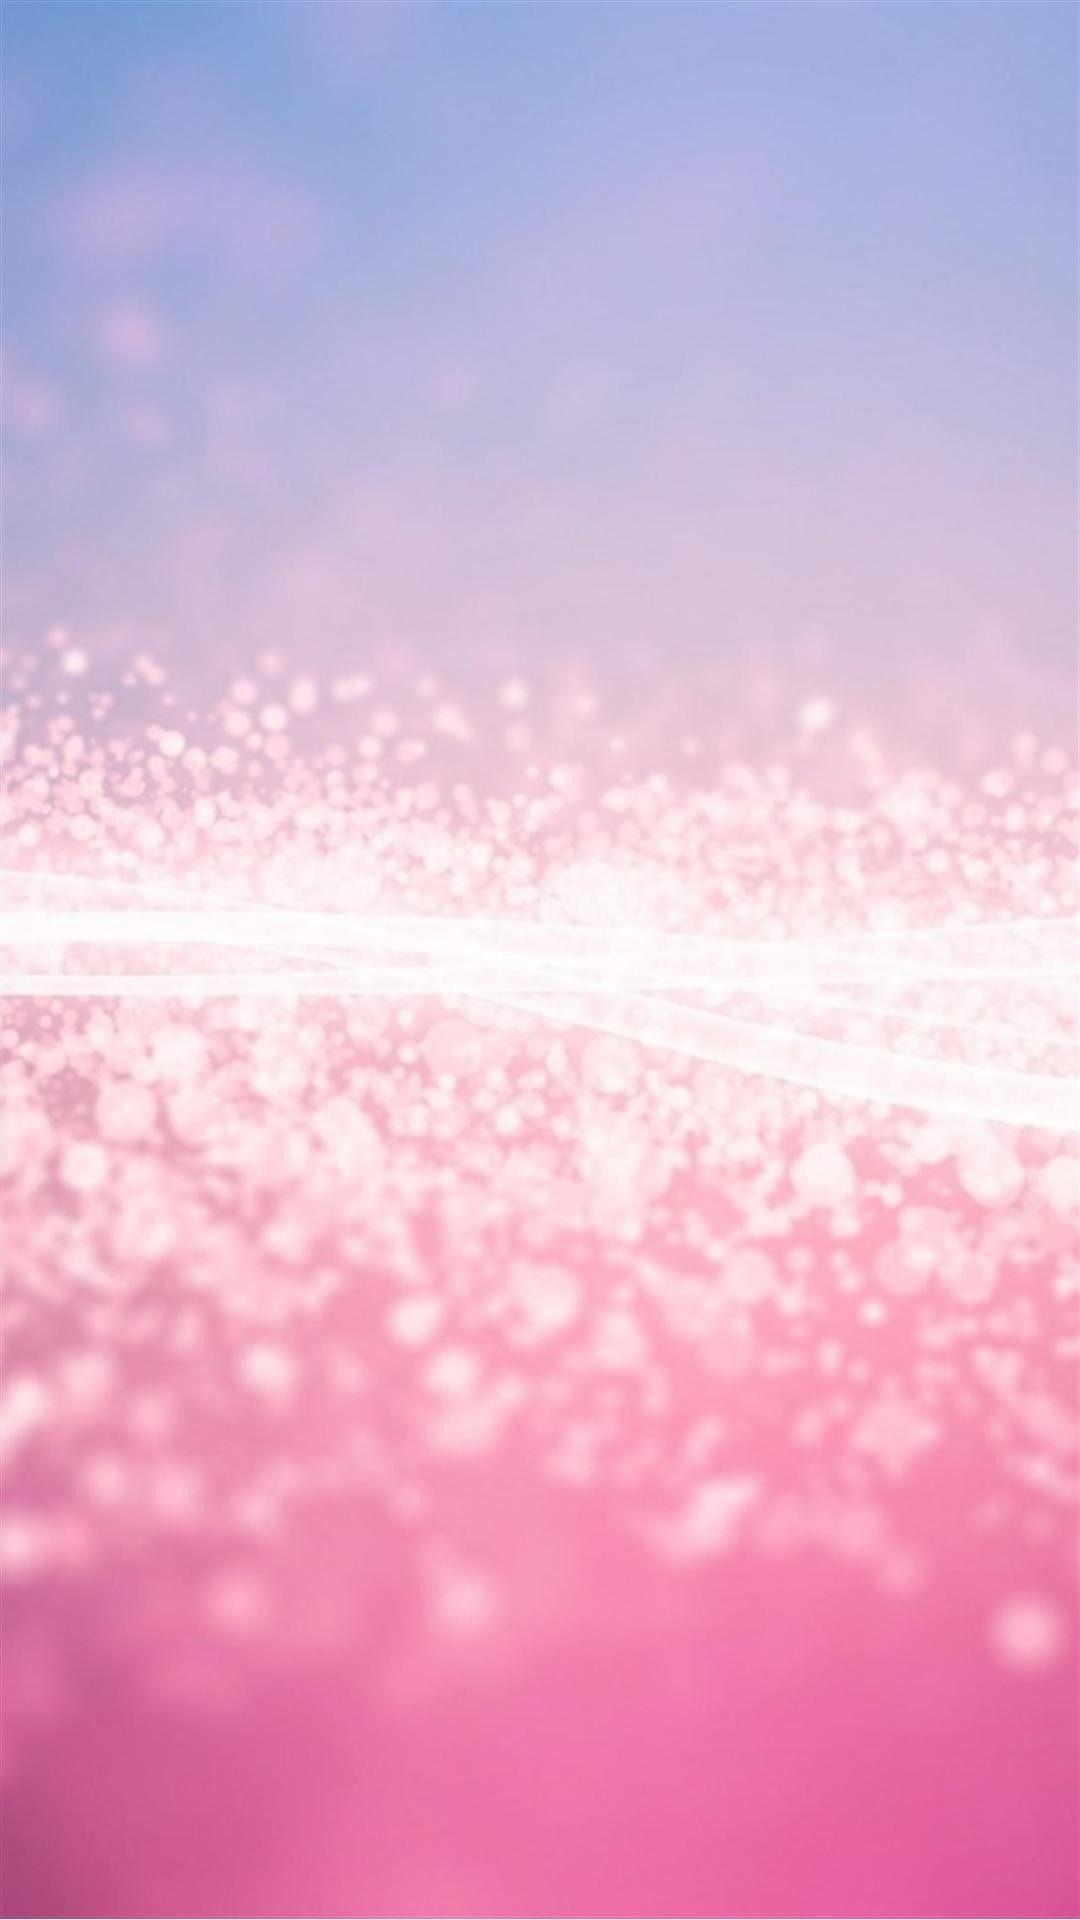 White and Pink Glitter Wallpaper for iPhone